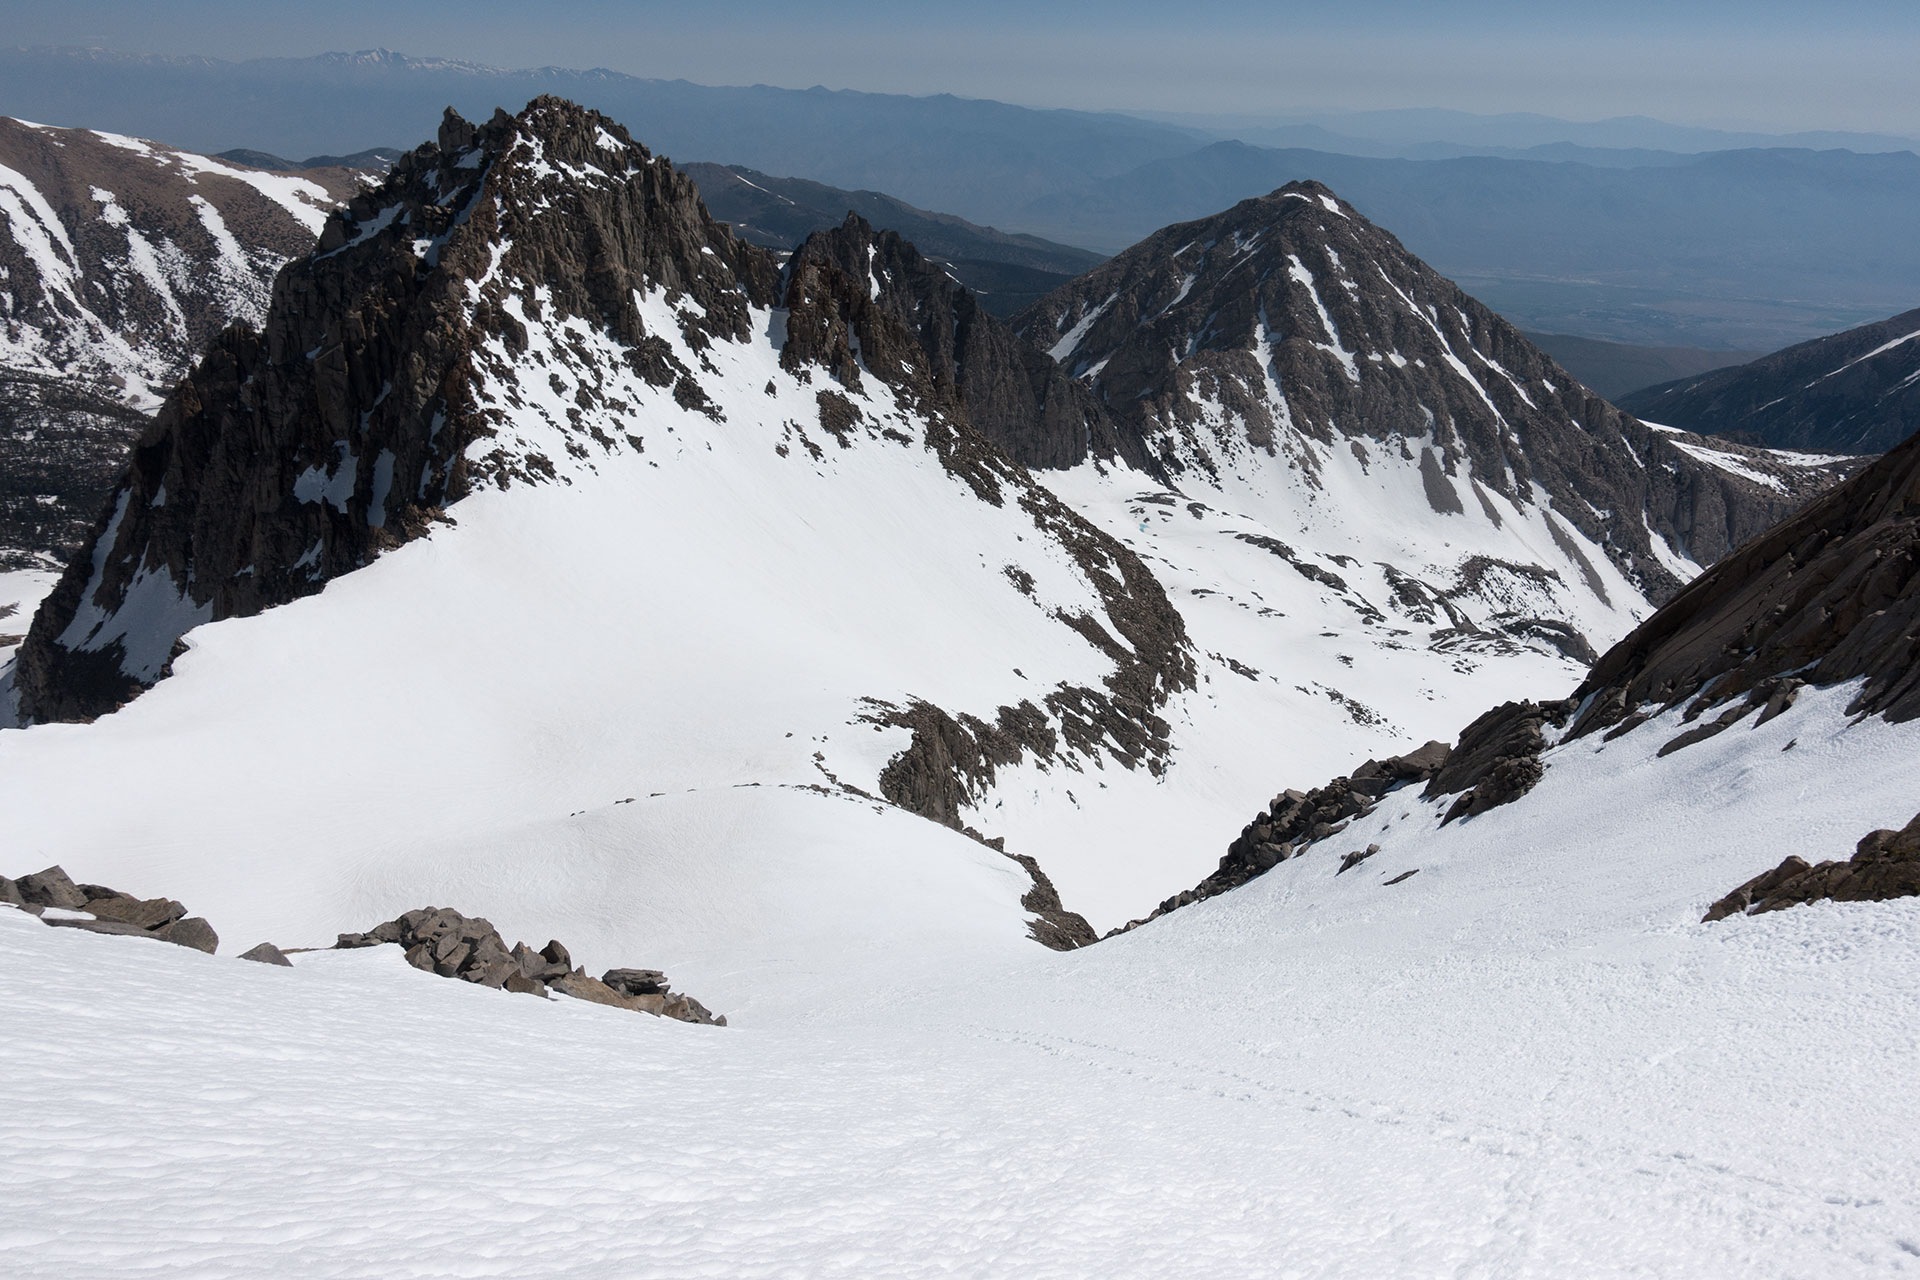 Mount Sill: Looking Down the L-Shaped Couloir toward Mount Gayley